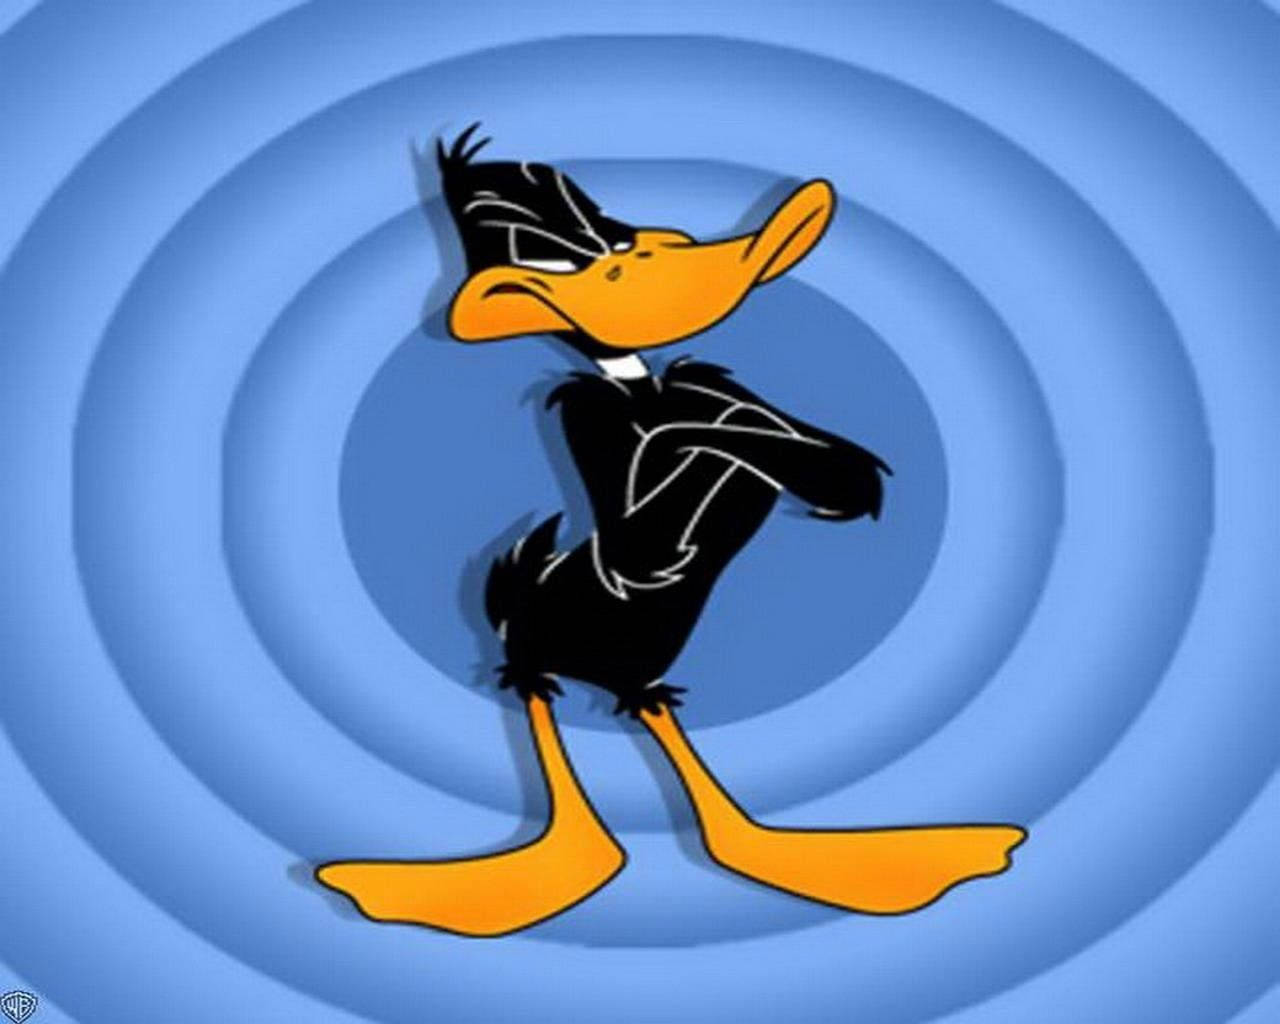 Sinister Look Of Daffy Duck Wallpaper